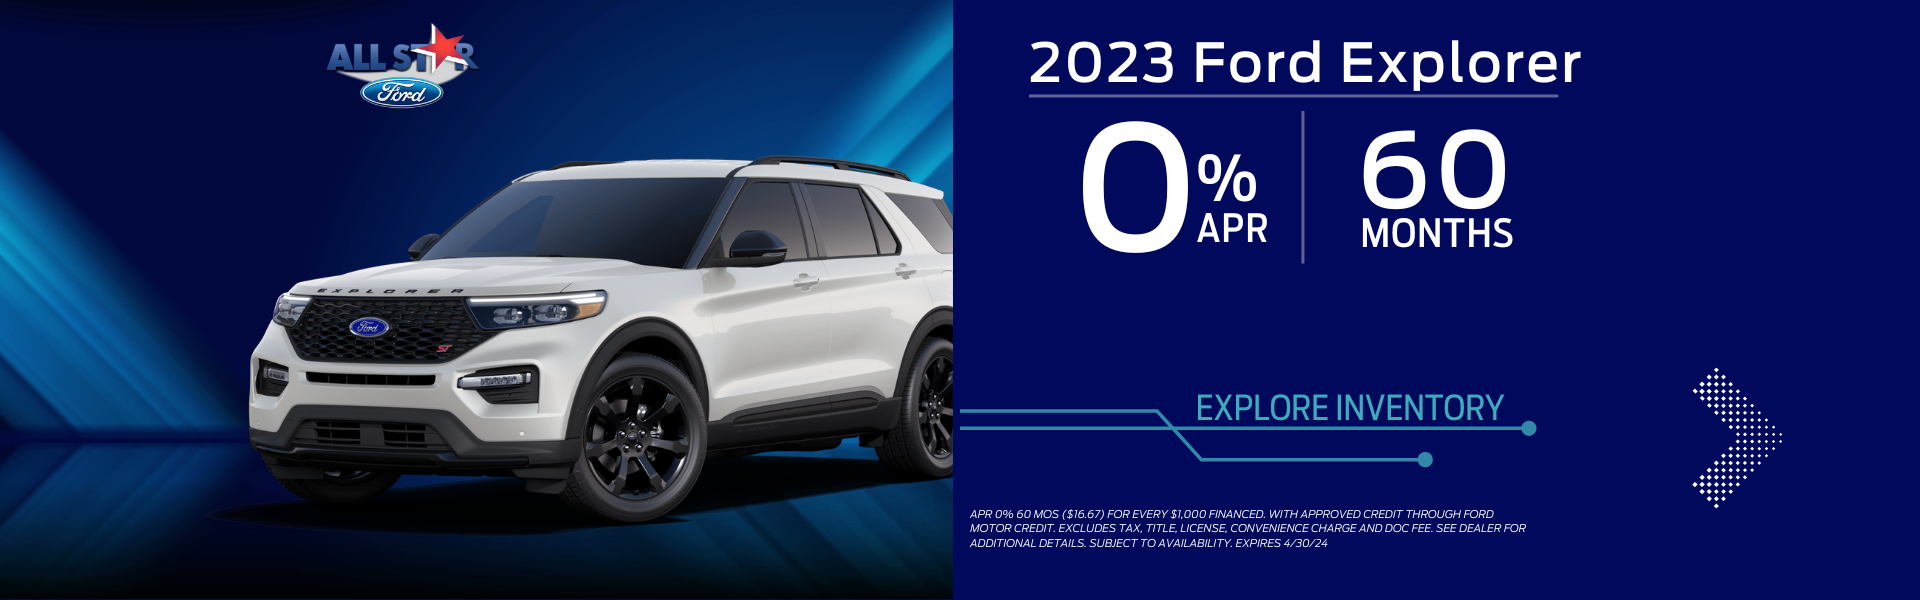 Ford Explorer Offers